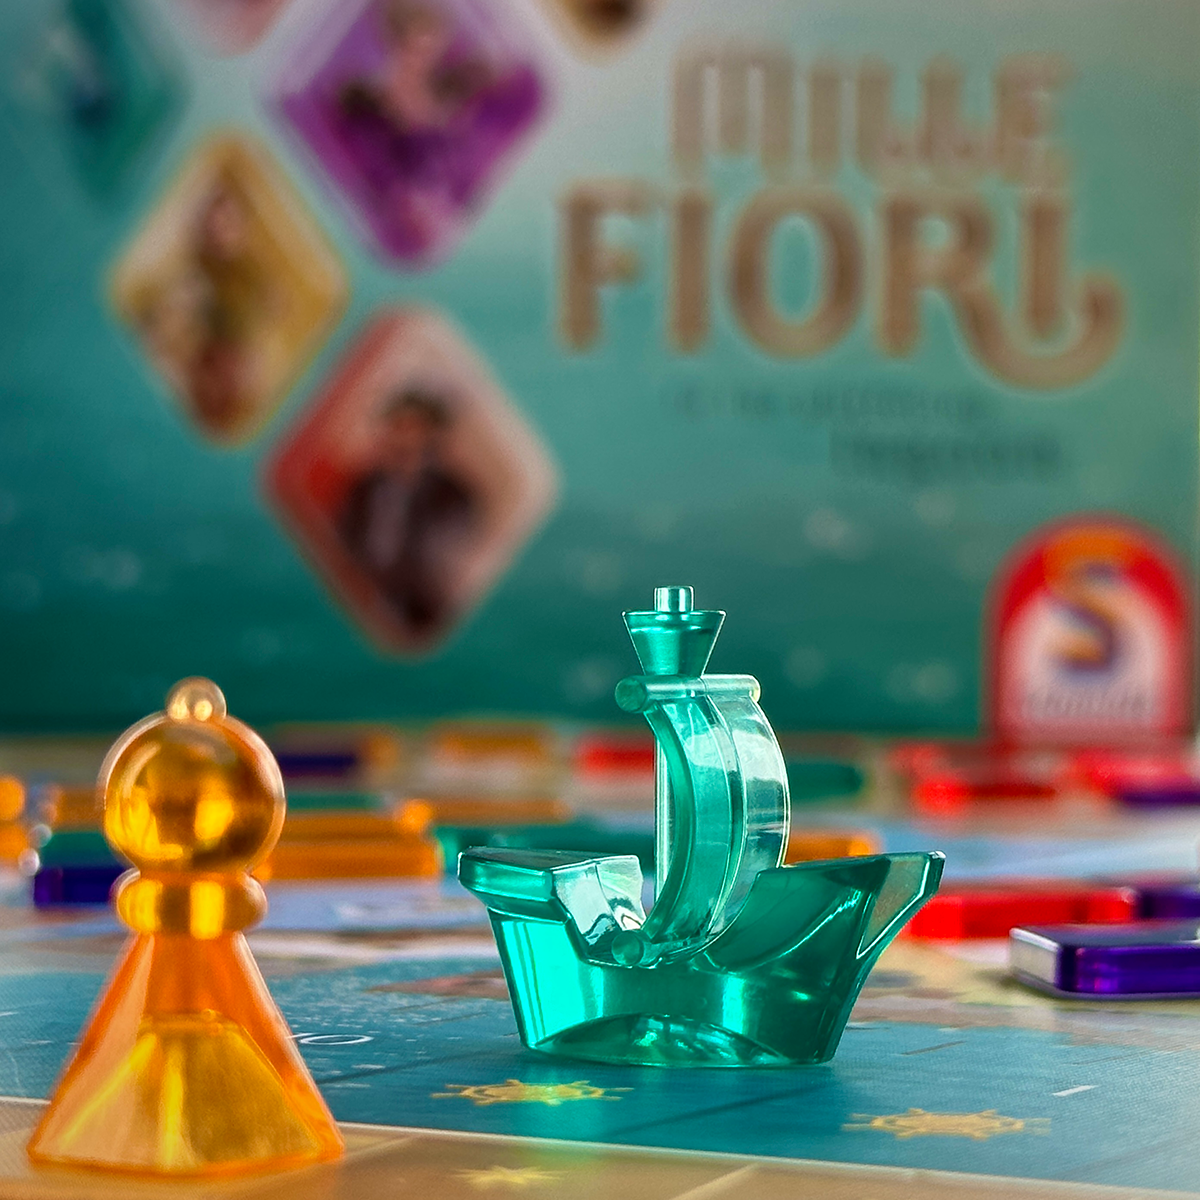 Mille Fiori Board Game Review Boat and Scoring Pawn